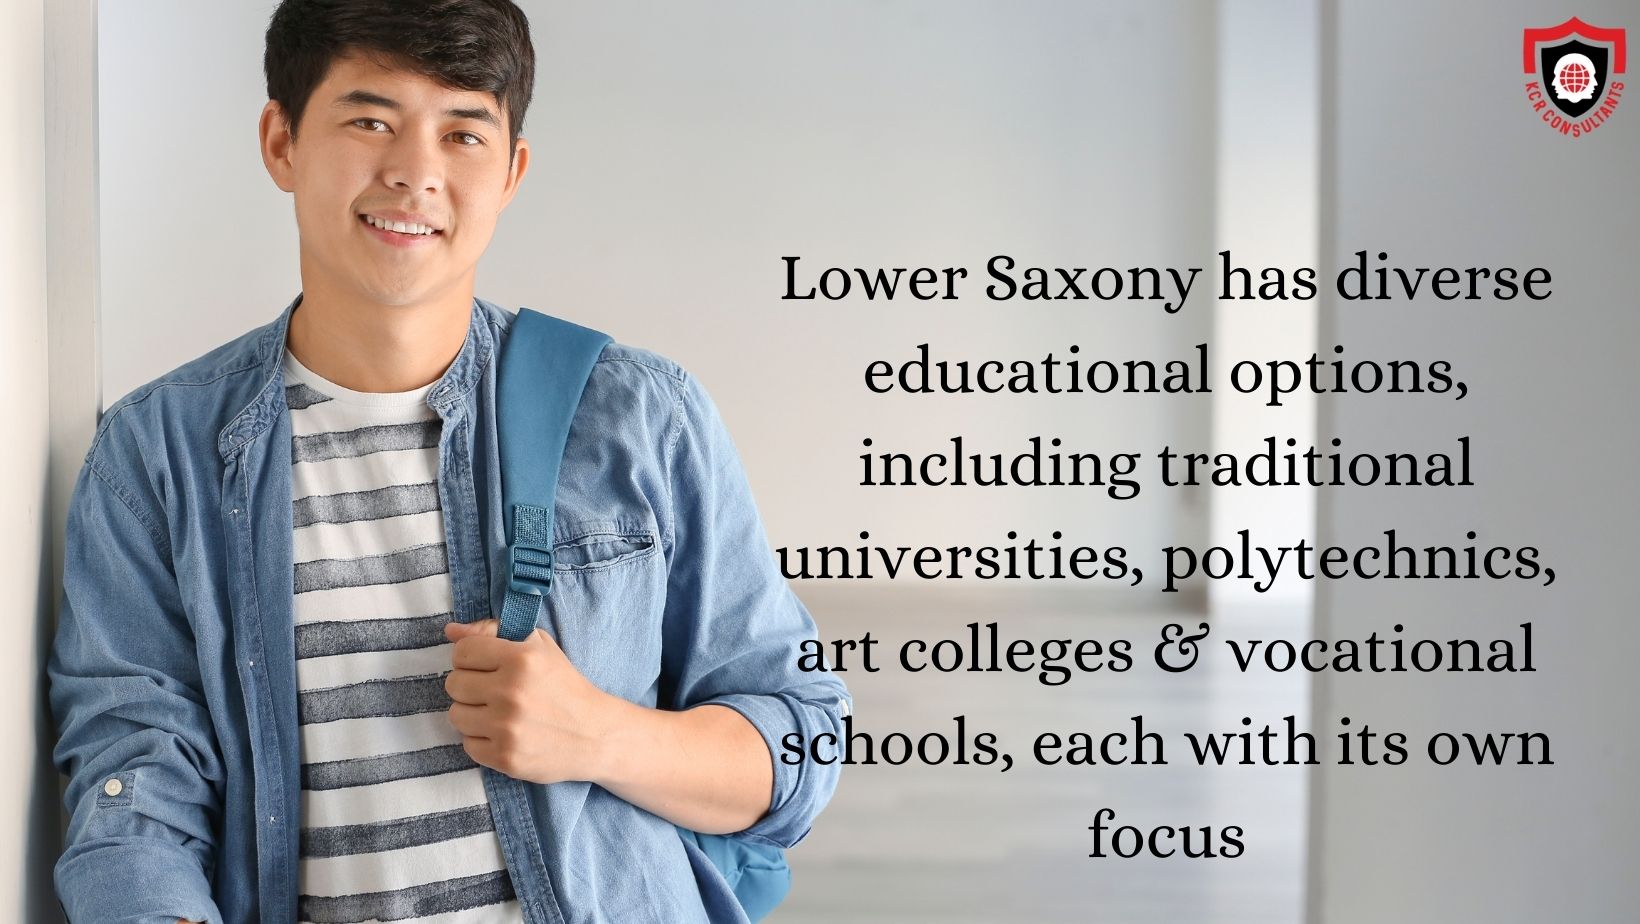 LOWER SAXONY - KCR CONSULTANTS - Educational options